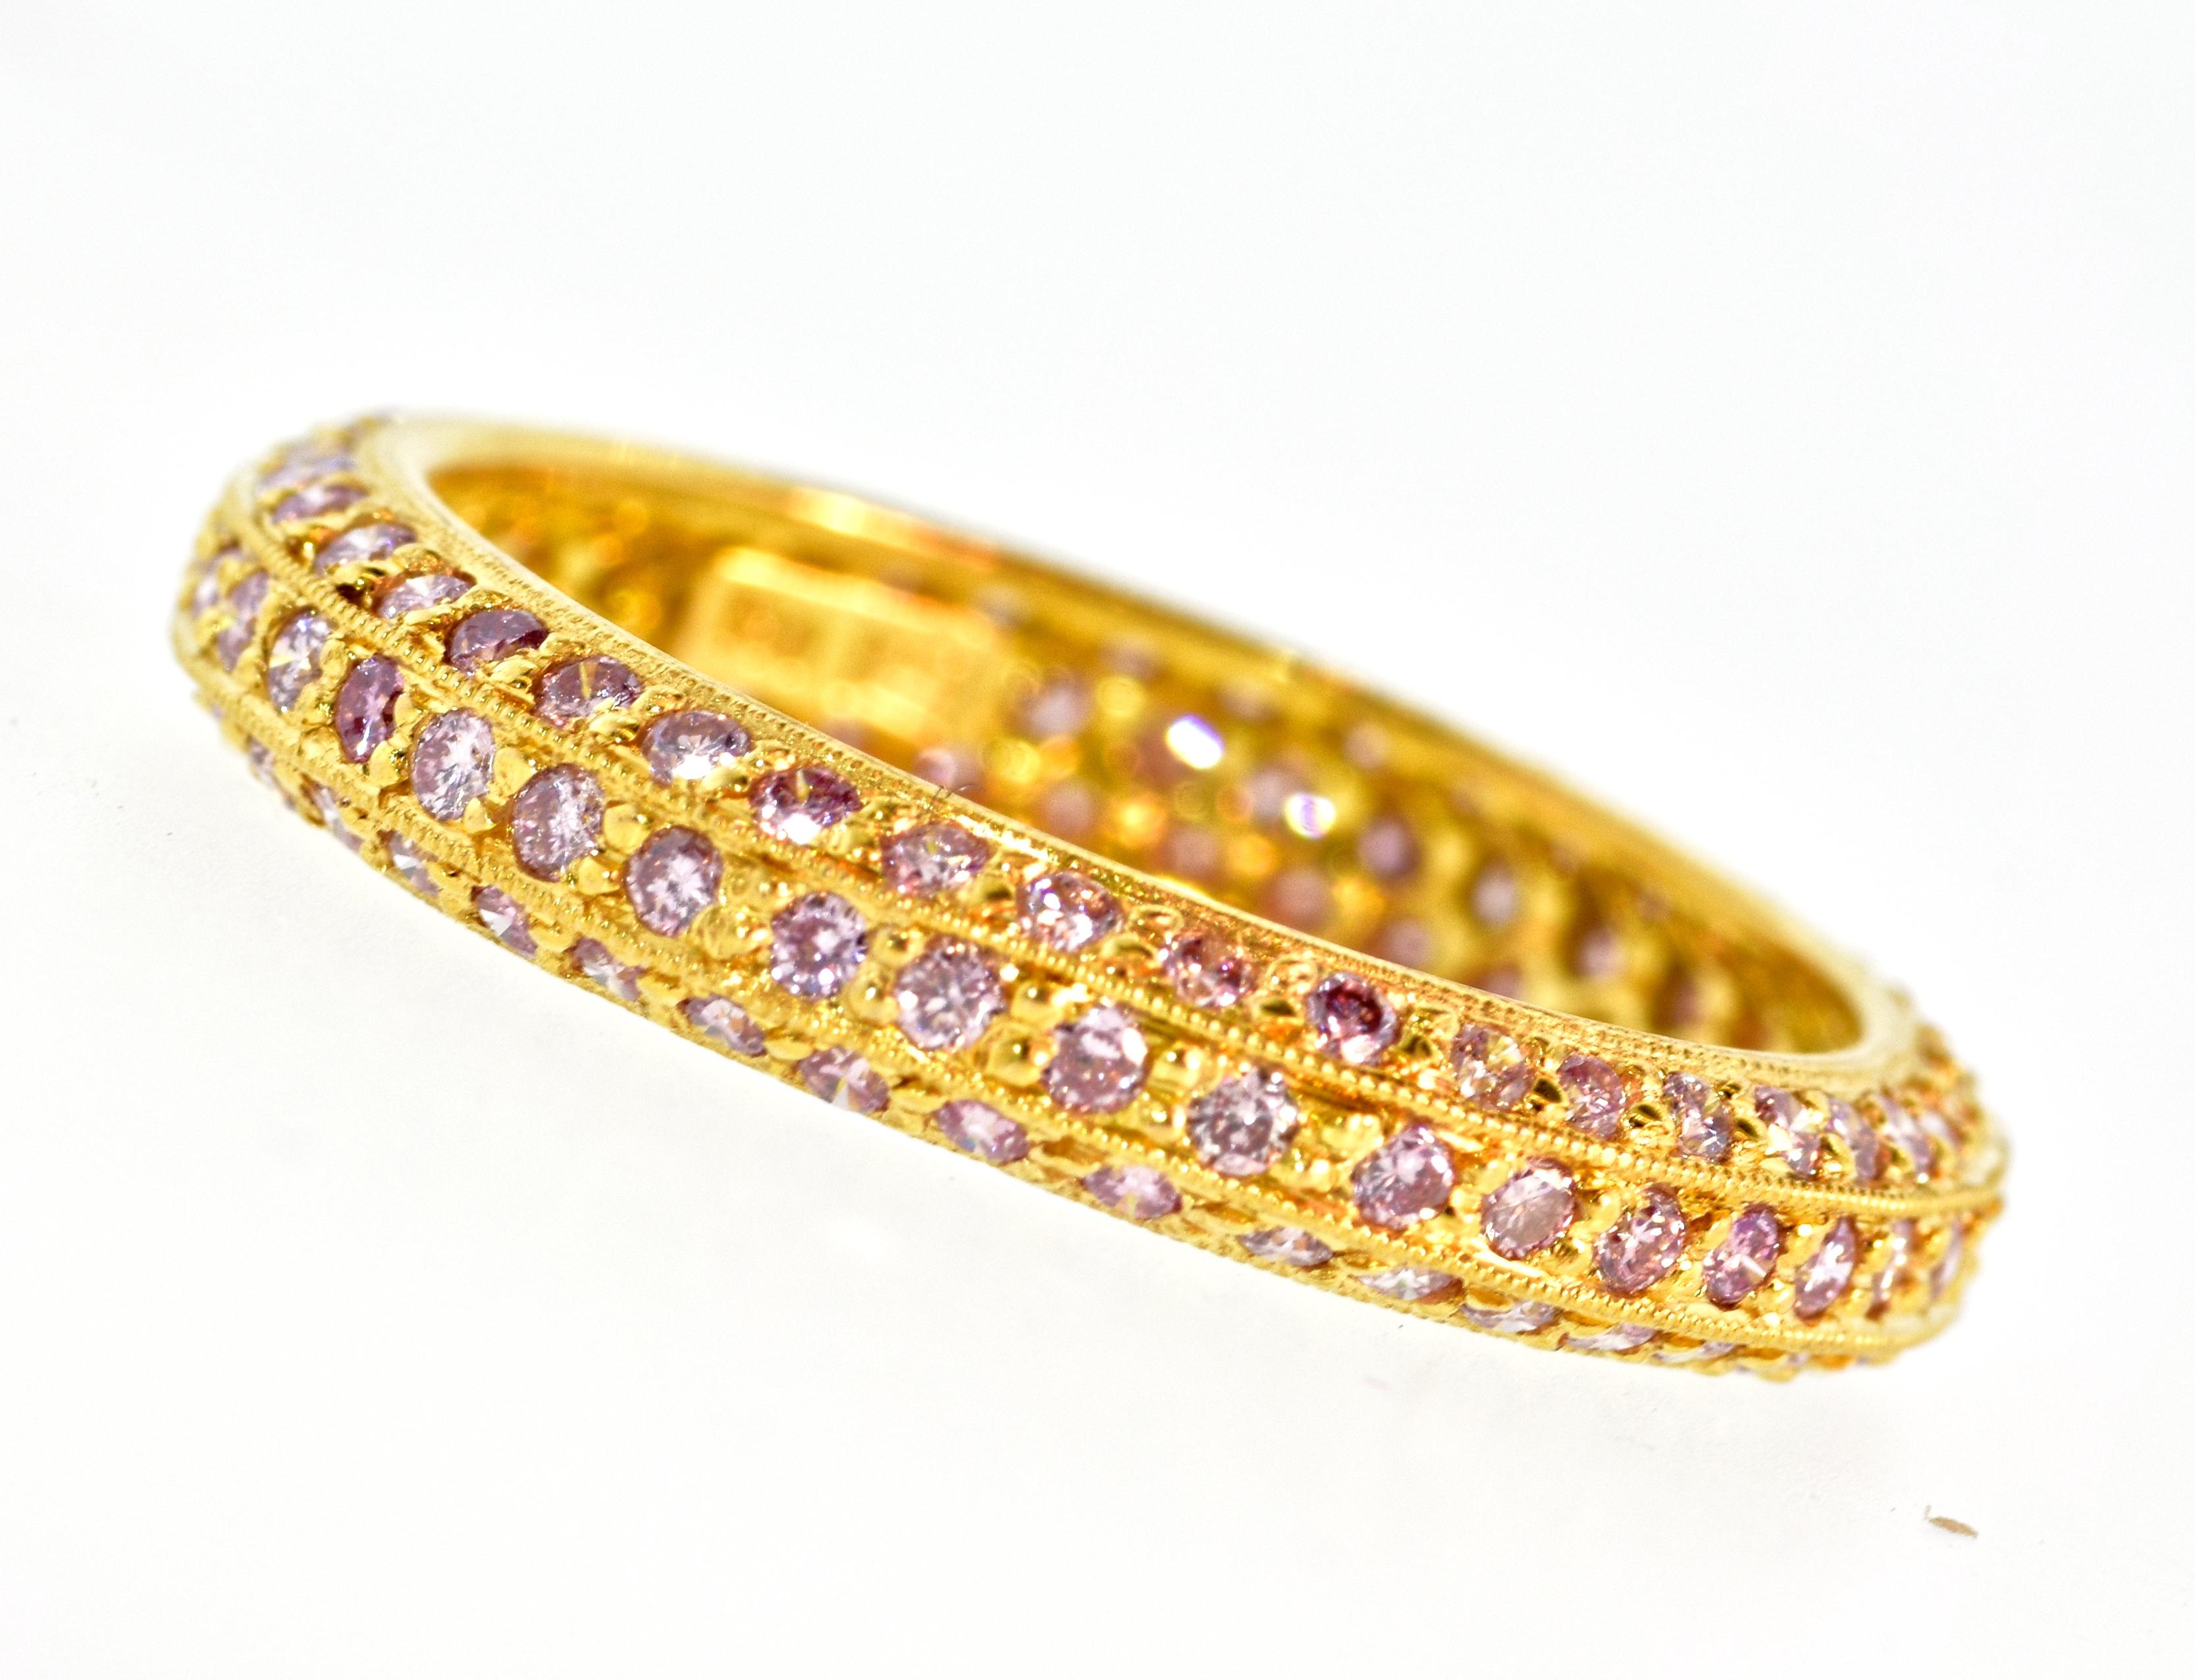 Fancy vivid natural pink diamond band  of three rows, with 136 diamonds - all well matched and cut well.  There is estimated to be 1.20 cts  This  new 18K gold band is a size 7.5.  The diamonds display a pretty vivid pink color. The clarity is is